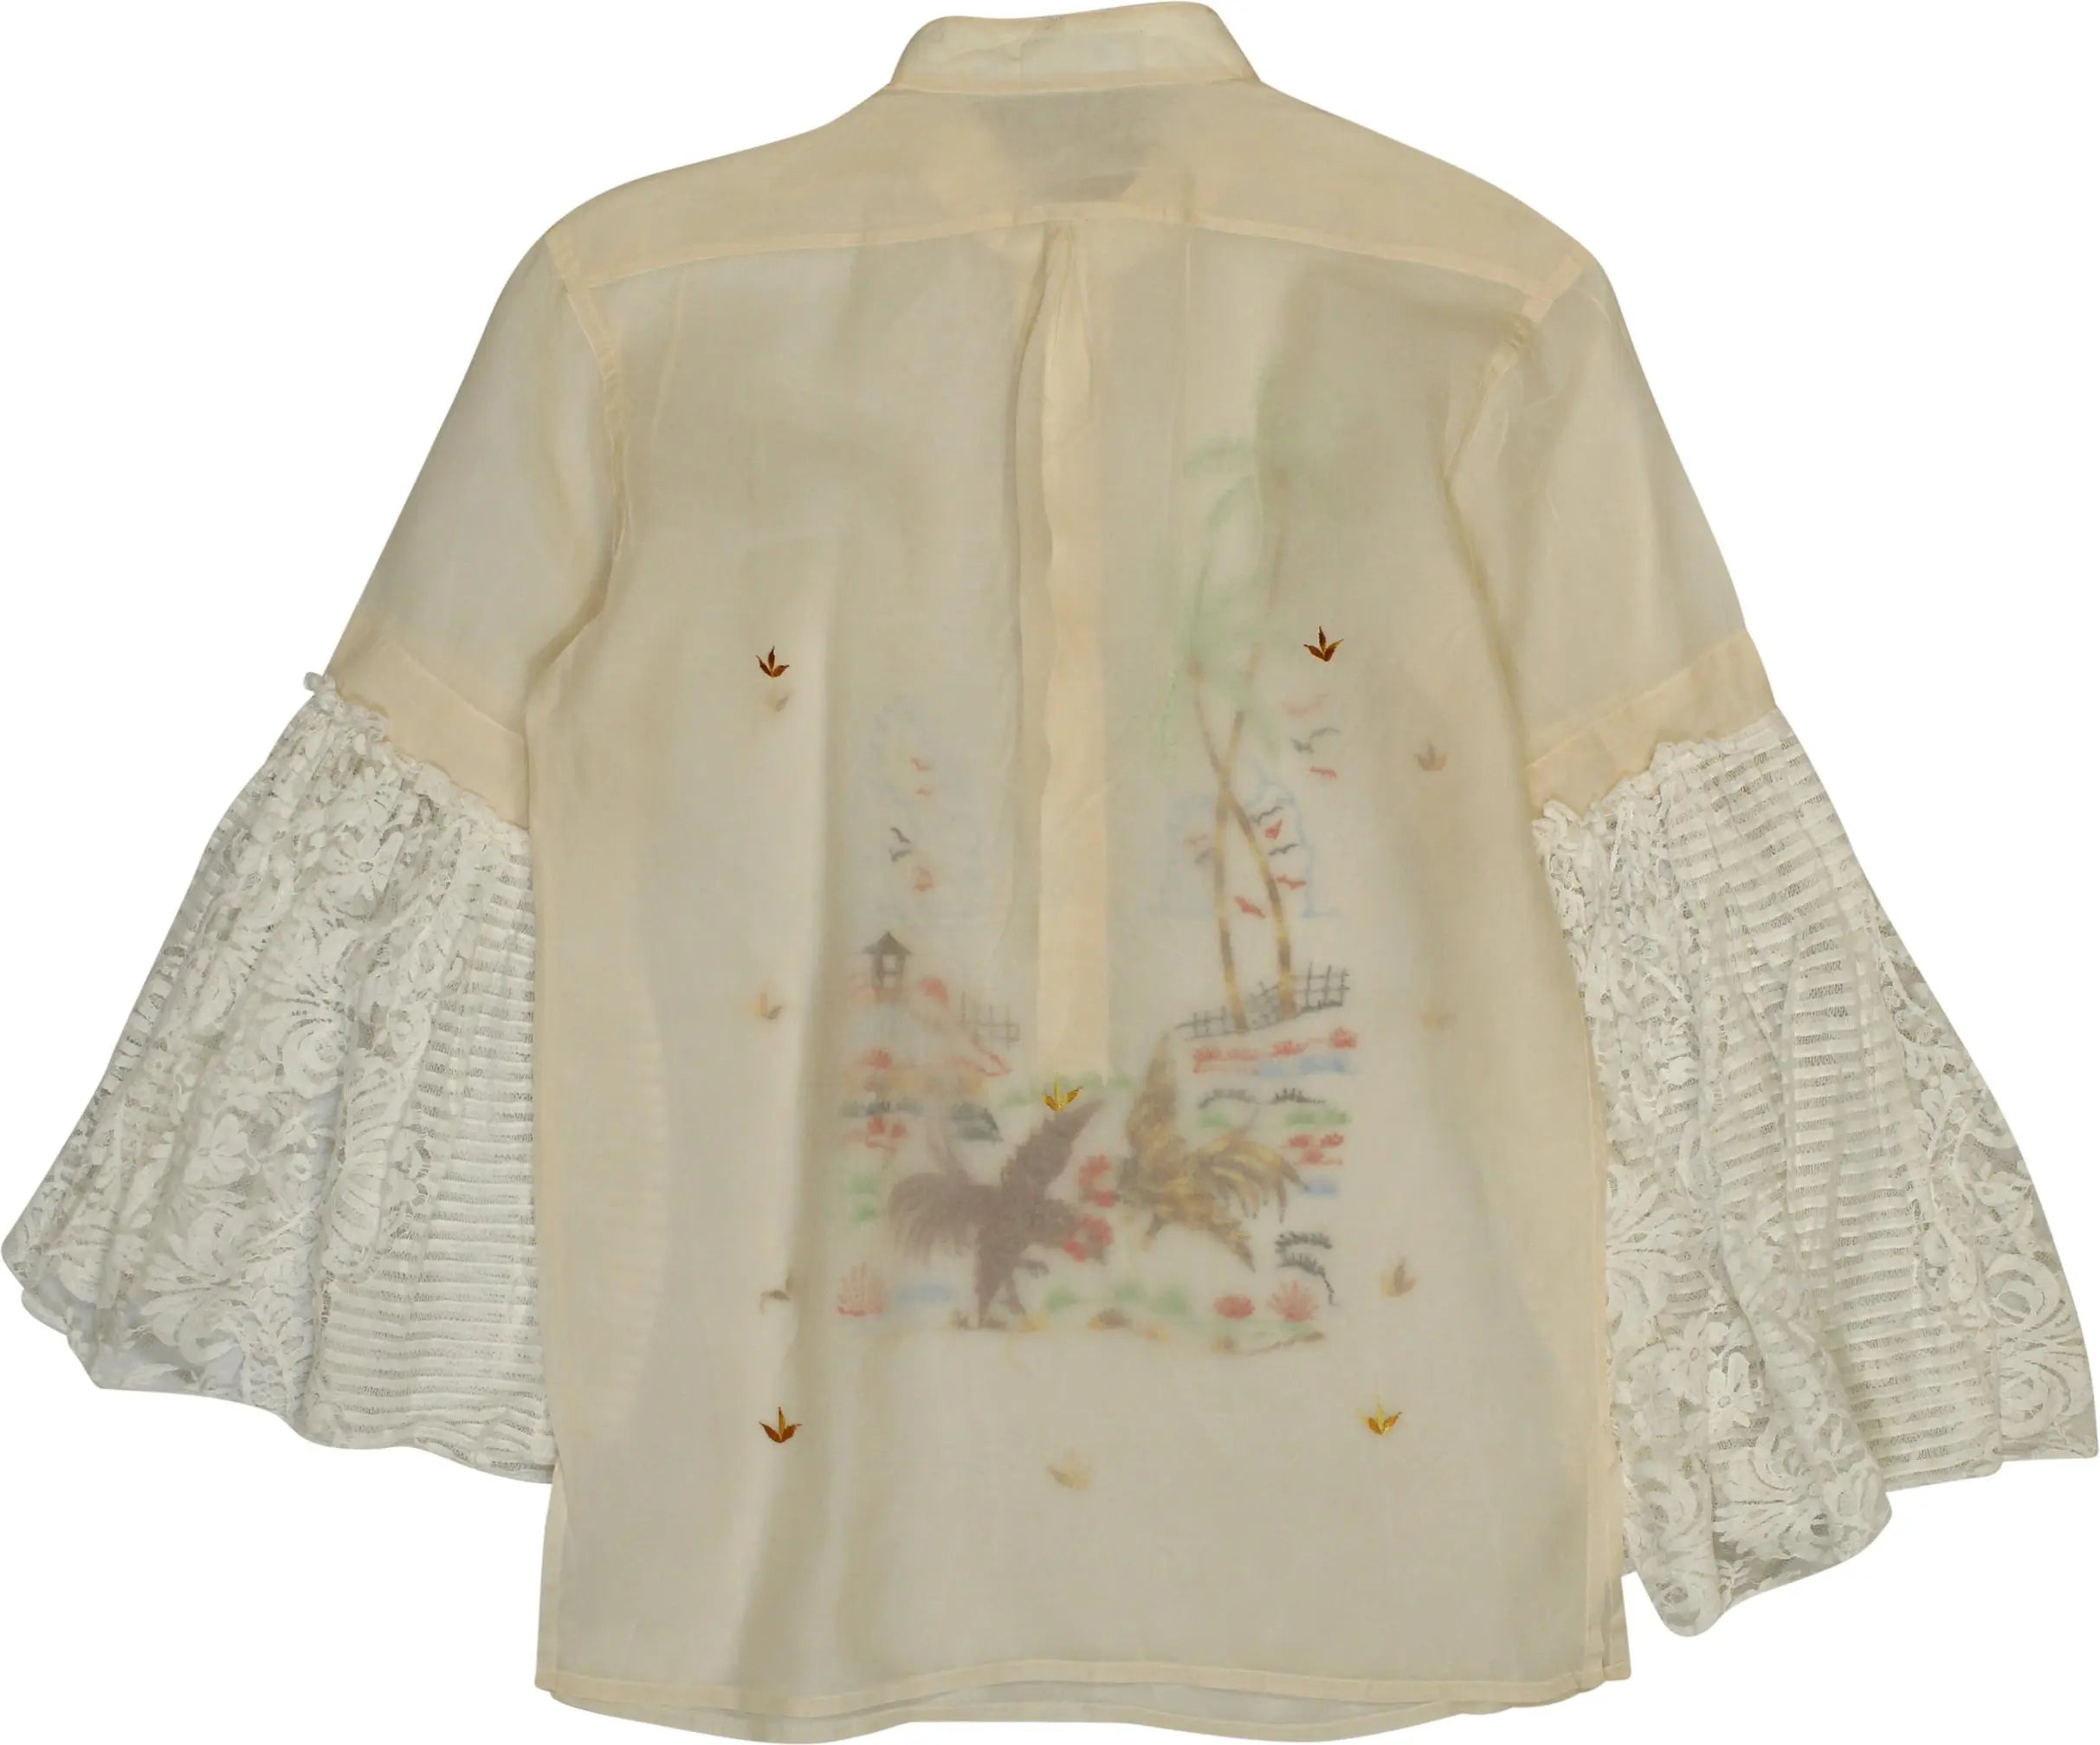 Handmade - Seethrough Top with Embroided Details- ThriftTale.com - Vintage and second handclothing